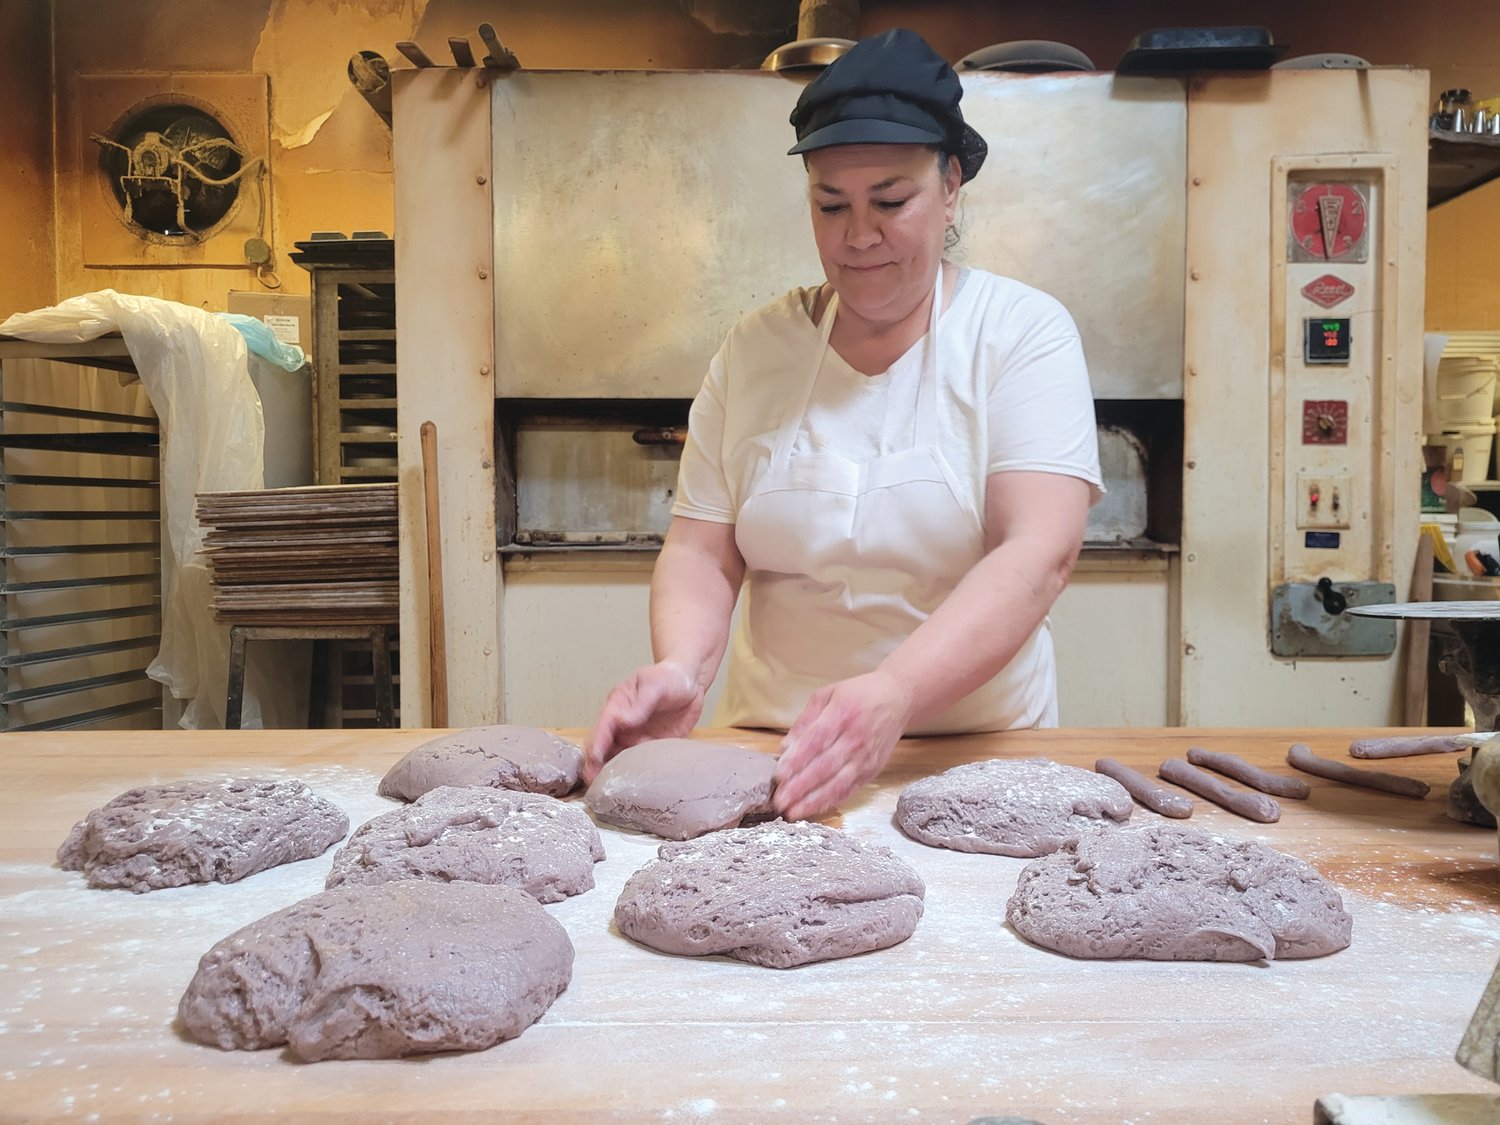 WINE, DON’T WHINE: Elena Pennacchini stood in the back of her family bakery, Solitro’s, rolling purple piles of dough into small circular twisted wine biscuits.